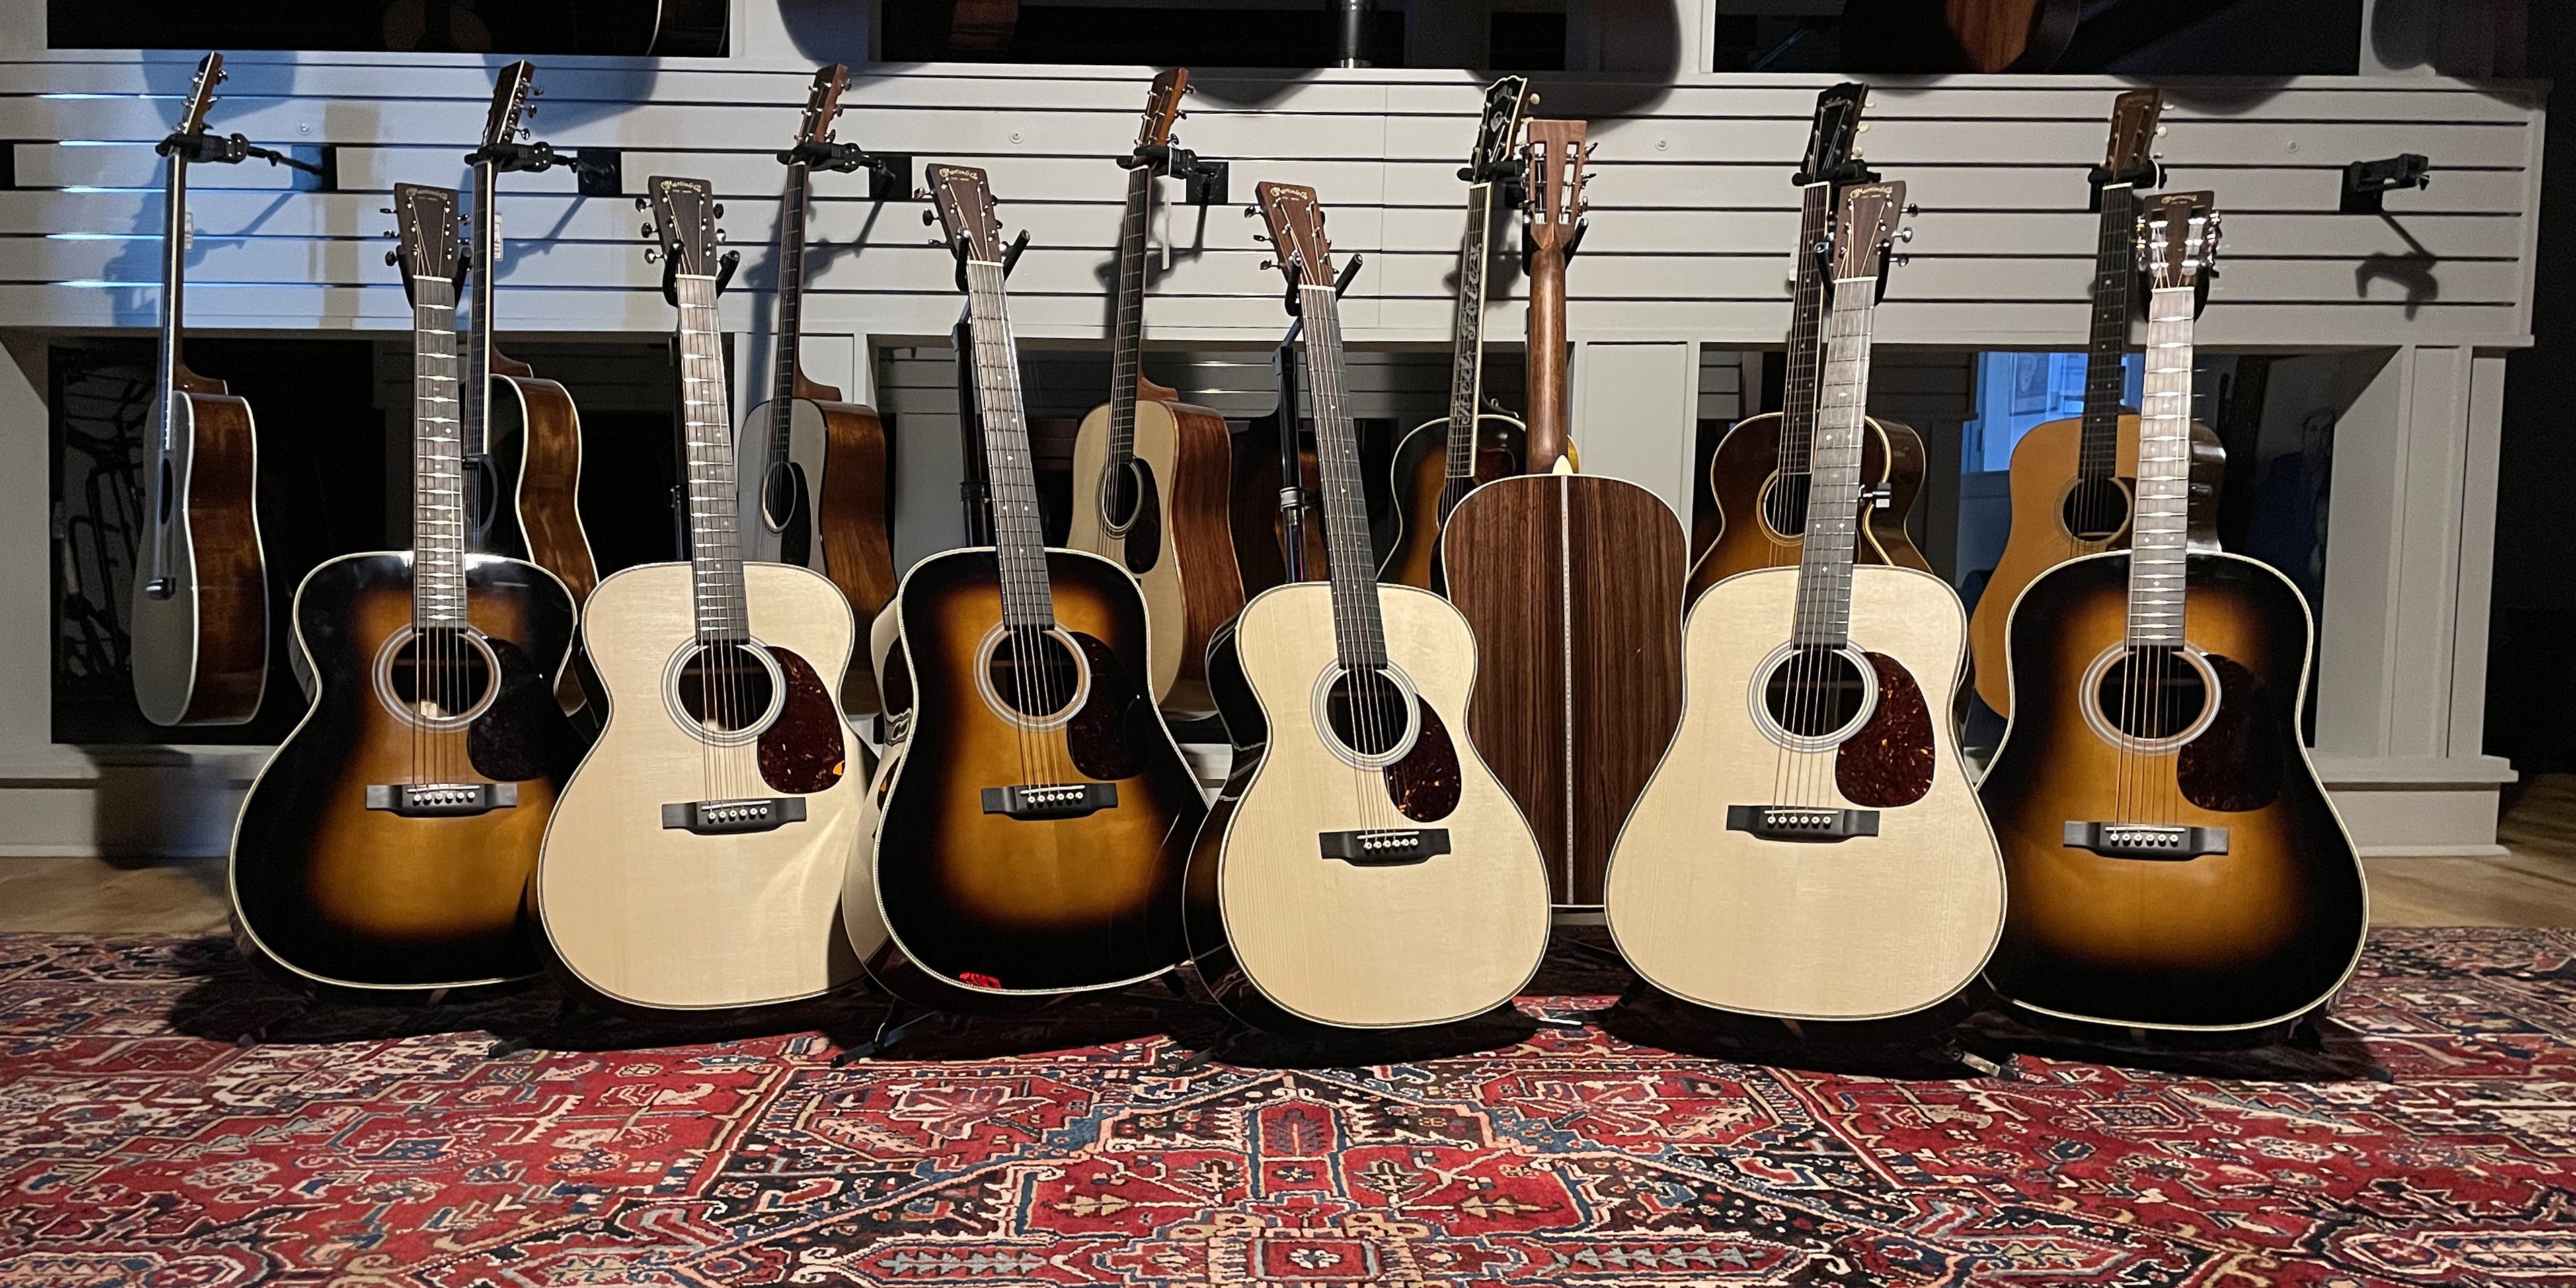 Gruhn Guitars, Inc. Nashville,Tn. Martin, Taylor, Fender new and vintage guitars and accessories